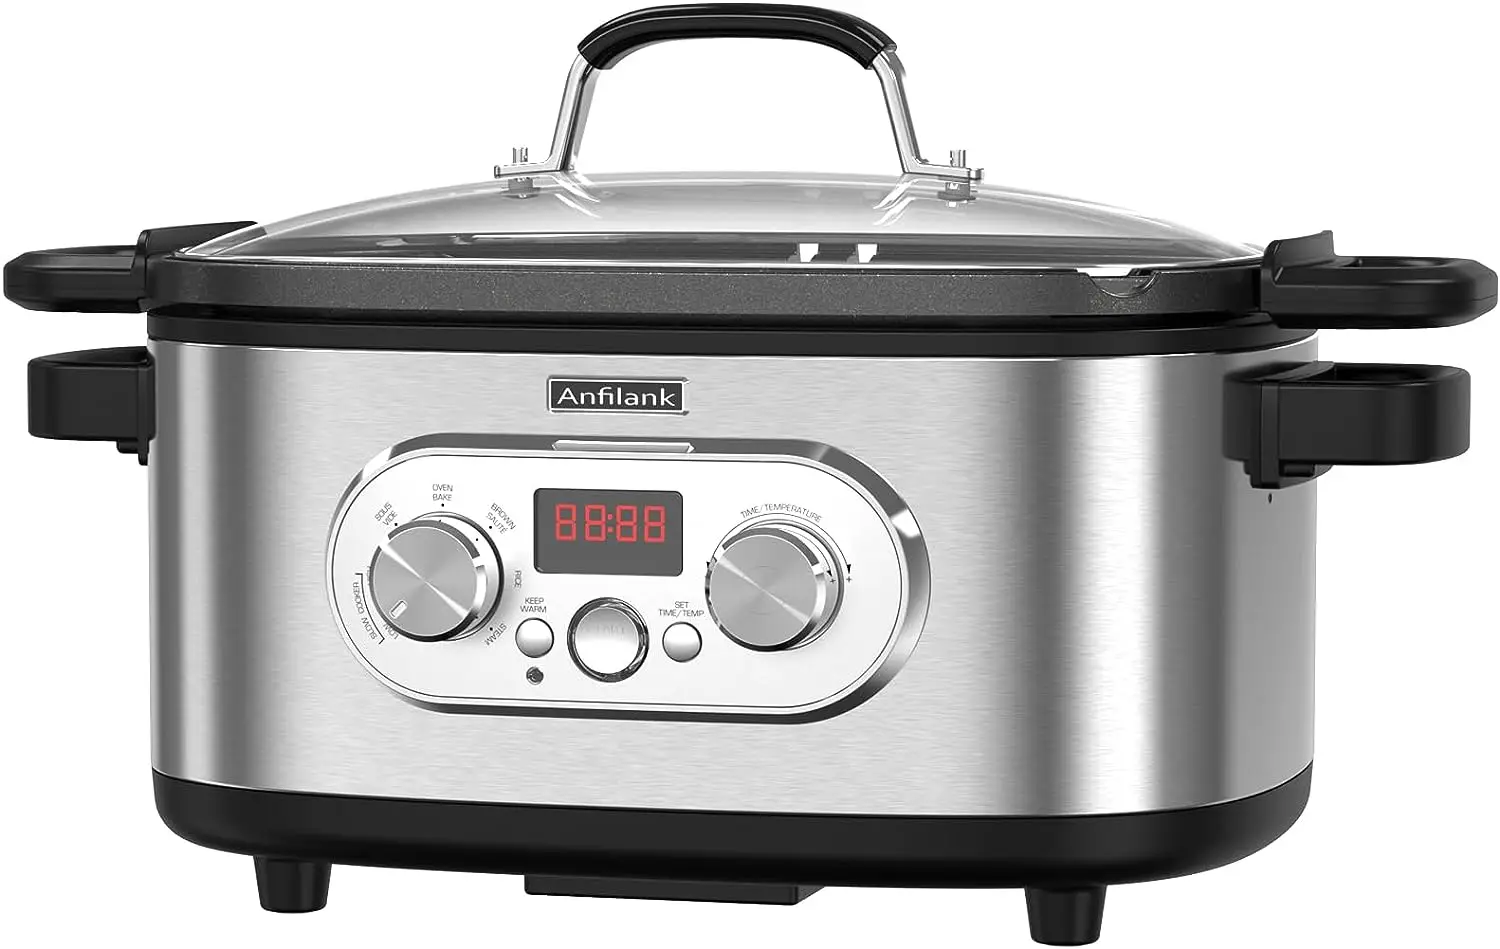 

Multi-Cooker, Programmable 6.8 Quart Slow Cooker, Presets to Sous Vide, Bake, Sauté, Cook Rice & More; with Sous Vide , Ste Oll